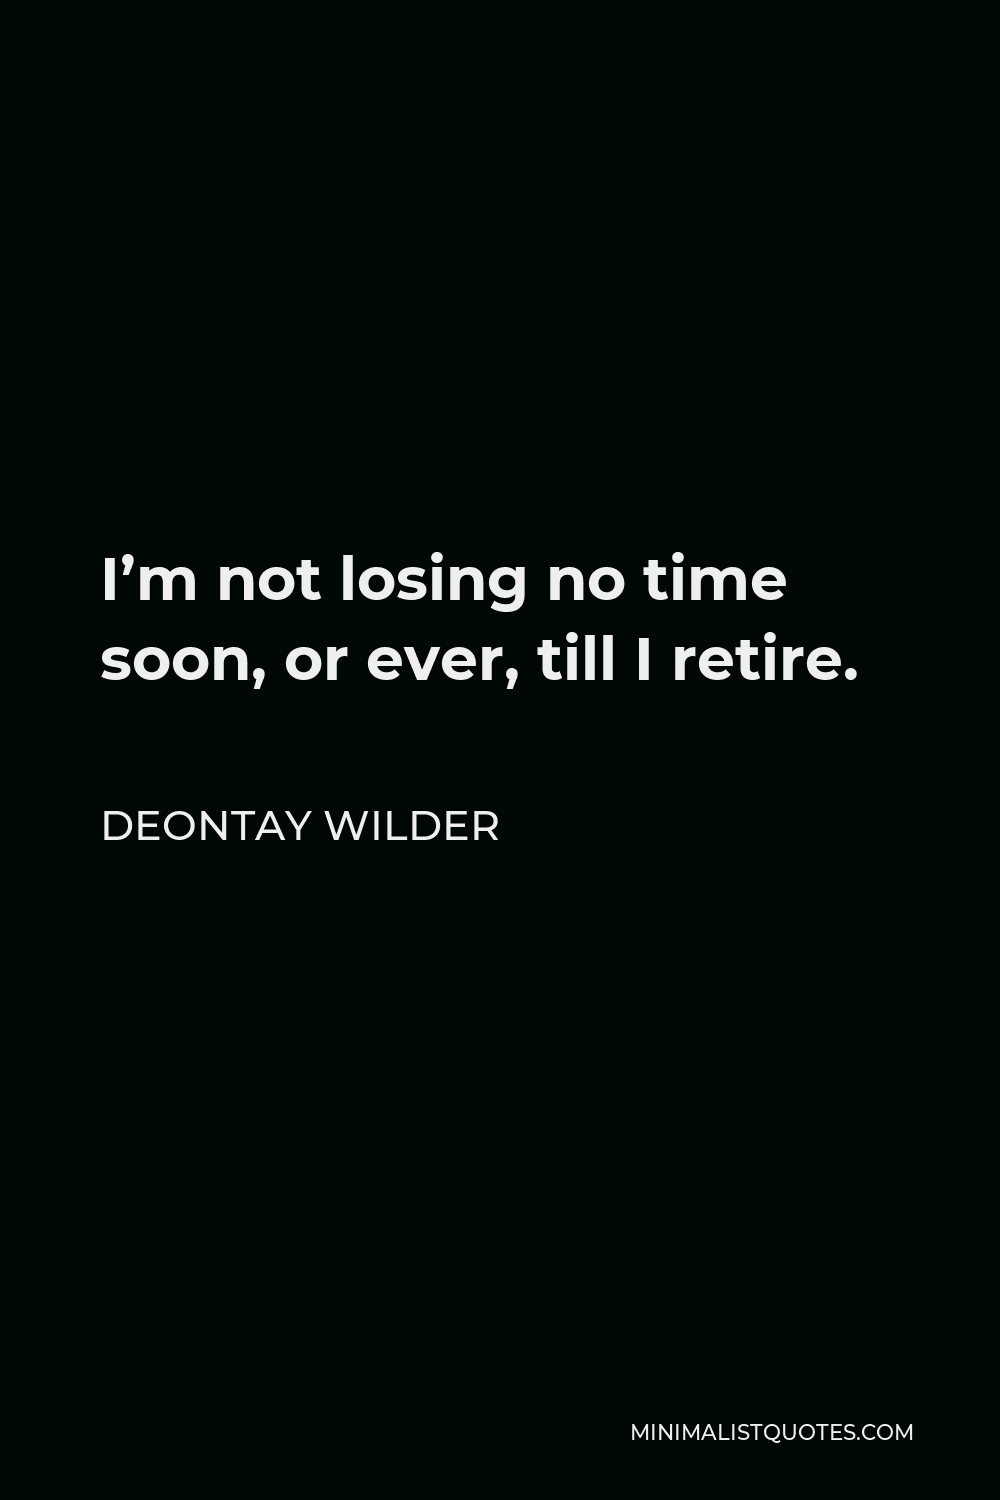 Deontay Wilder Quote - I’m not losing no time soon, or ever, till I retire.